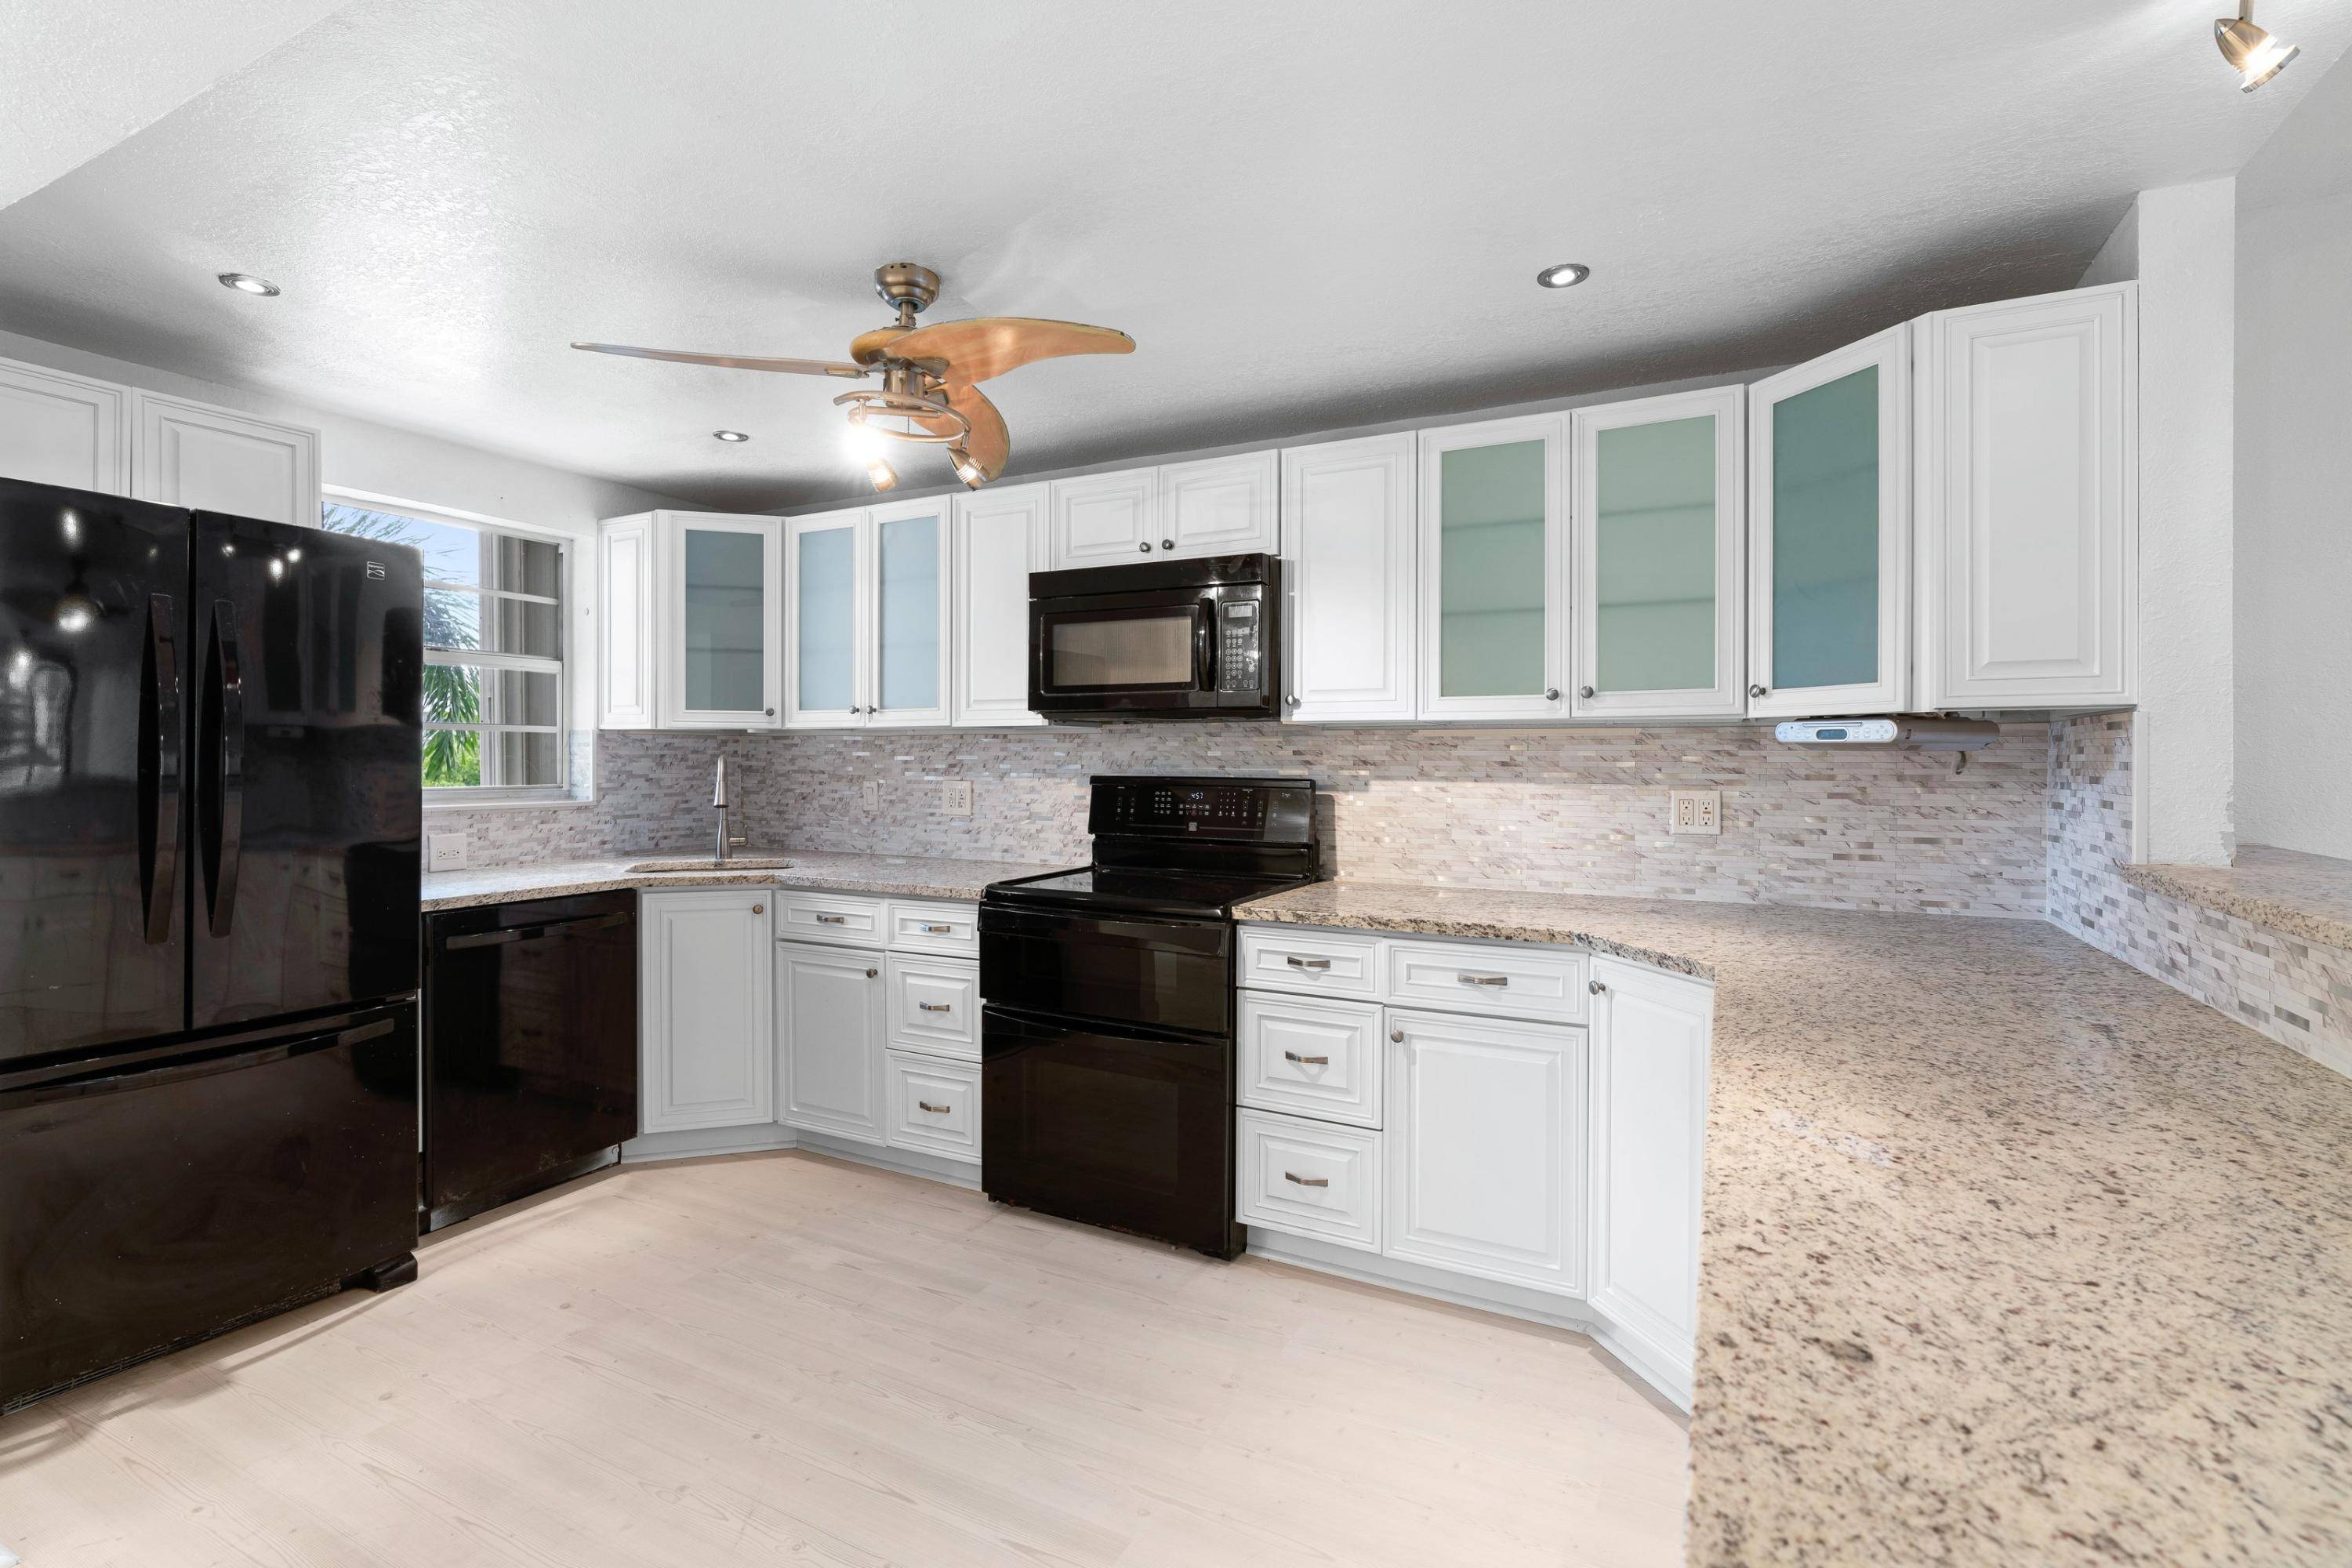 RECENTLY Renovated Kitchen, new floors, all fresh new paint Do you desire a modern condo with luxurious touches ?